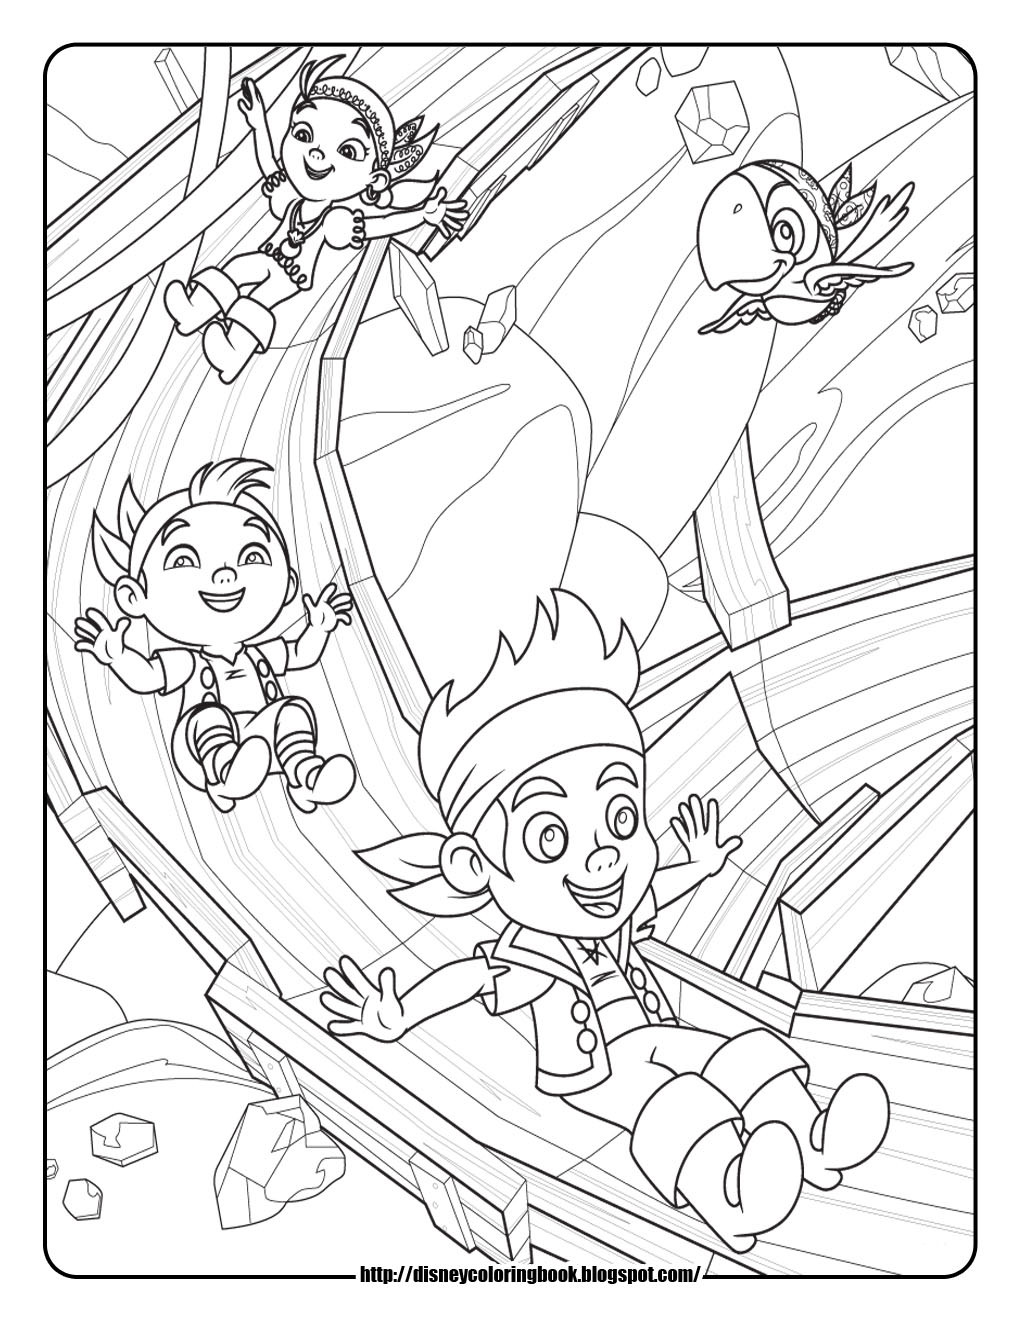 Jake And The Neverland Pirates Coloring Pages
 Learn To Coloring August 2011